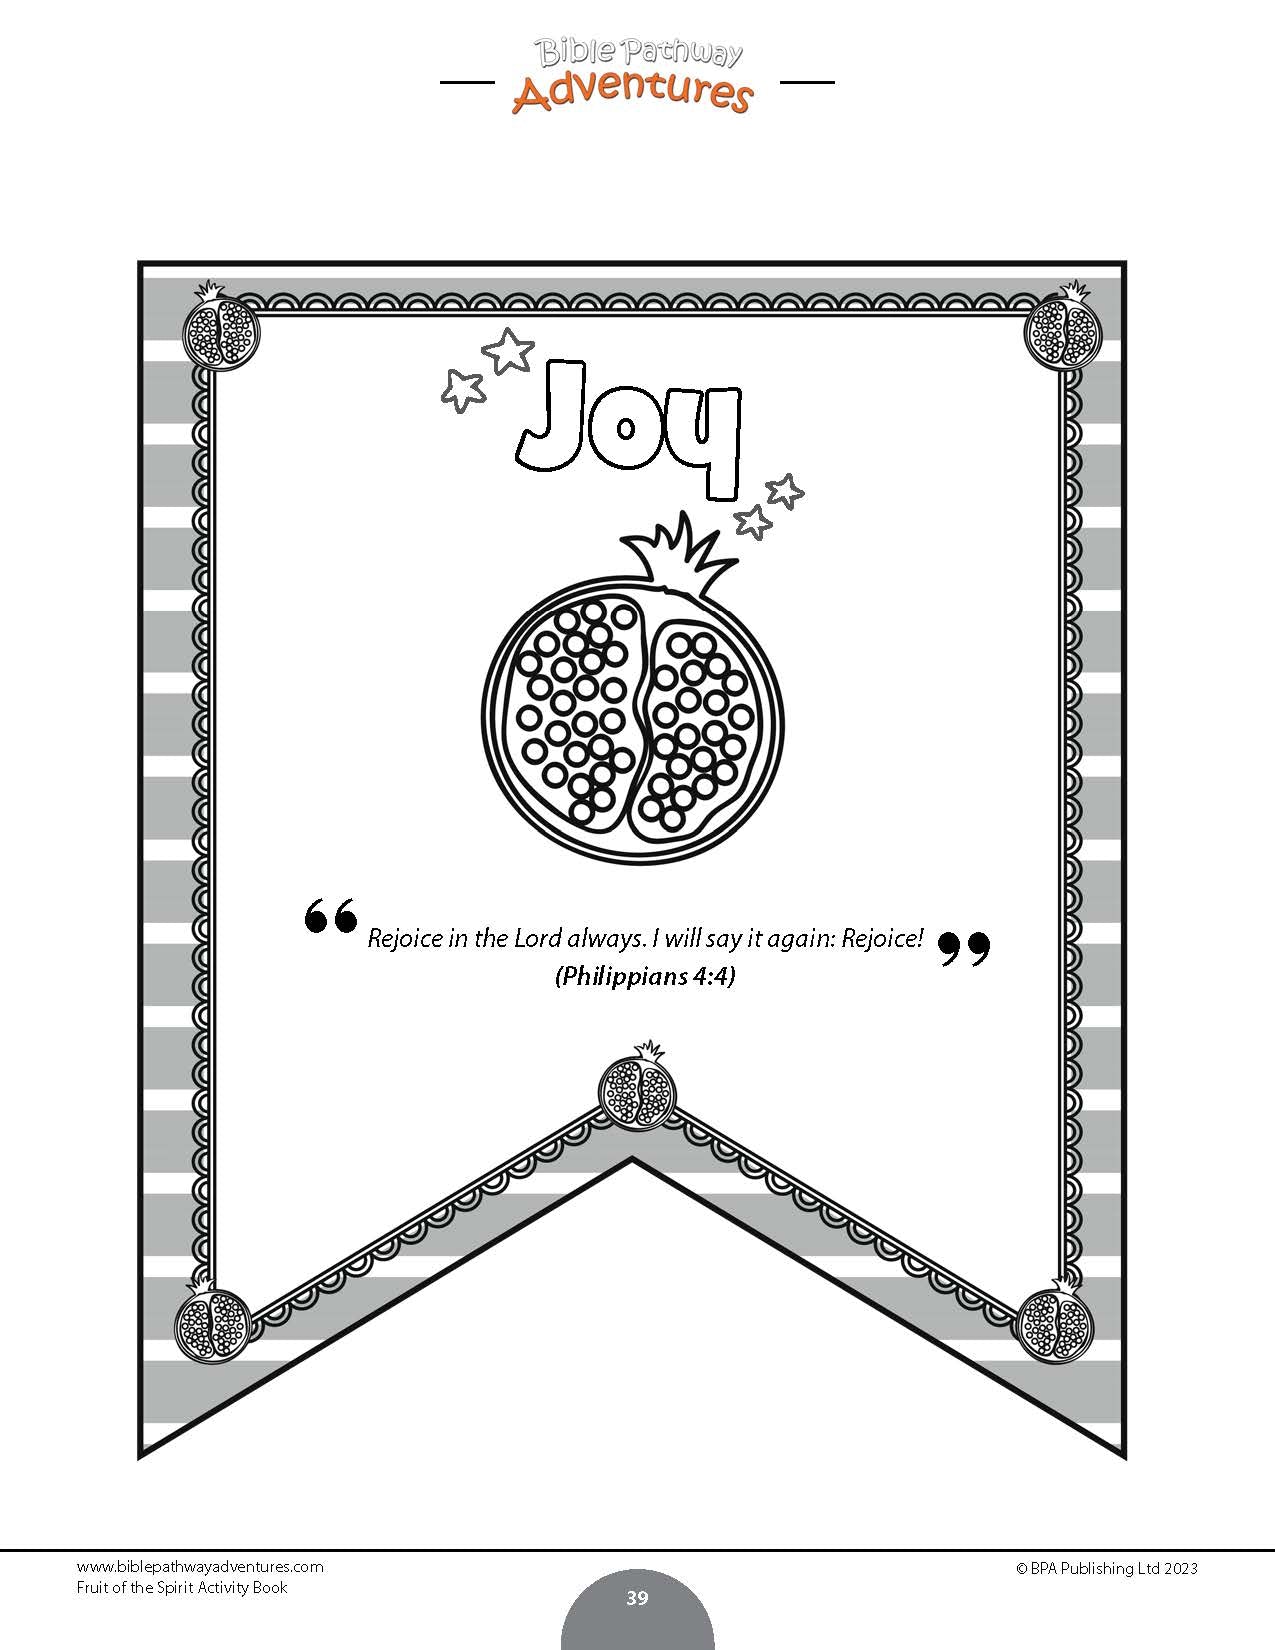 REJOICE & GROW MY DRAWING AND COLOURING BOOK 3